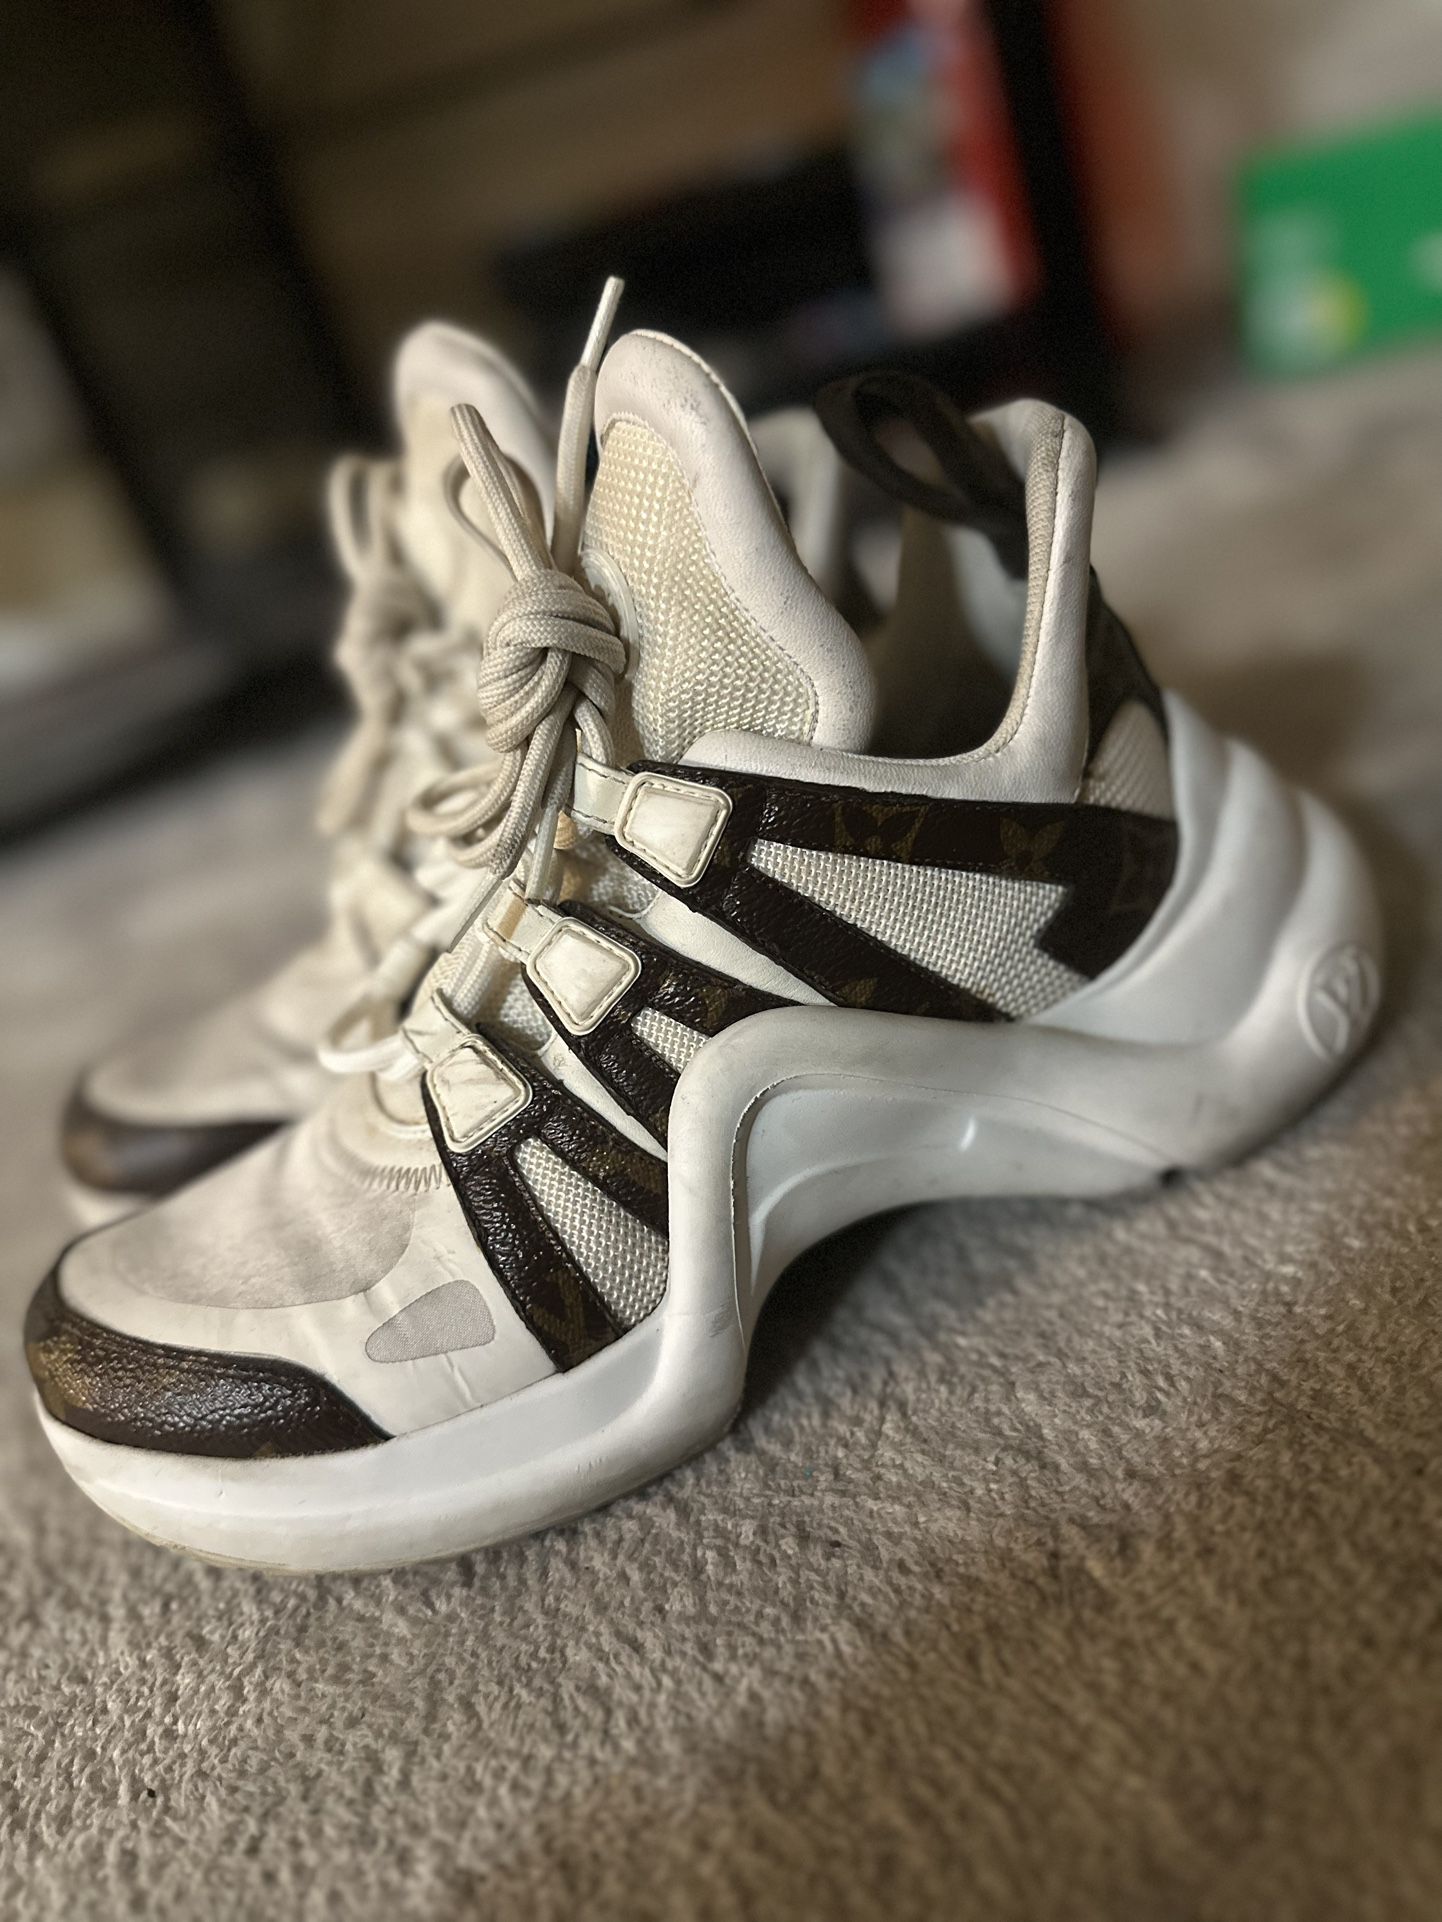 Lv Archlight Sneaker - Shoes